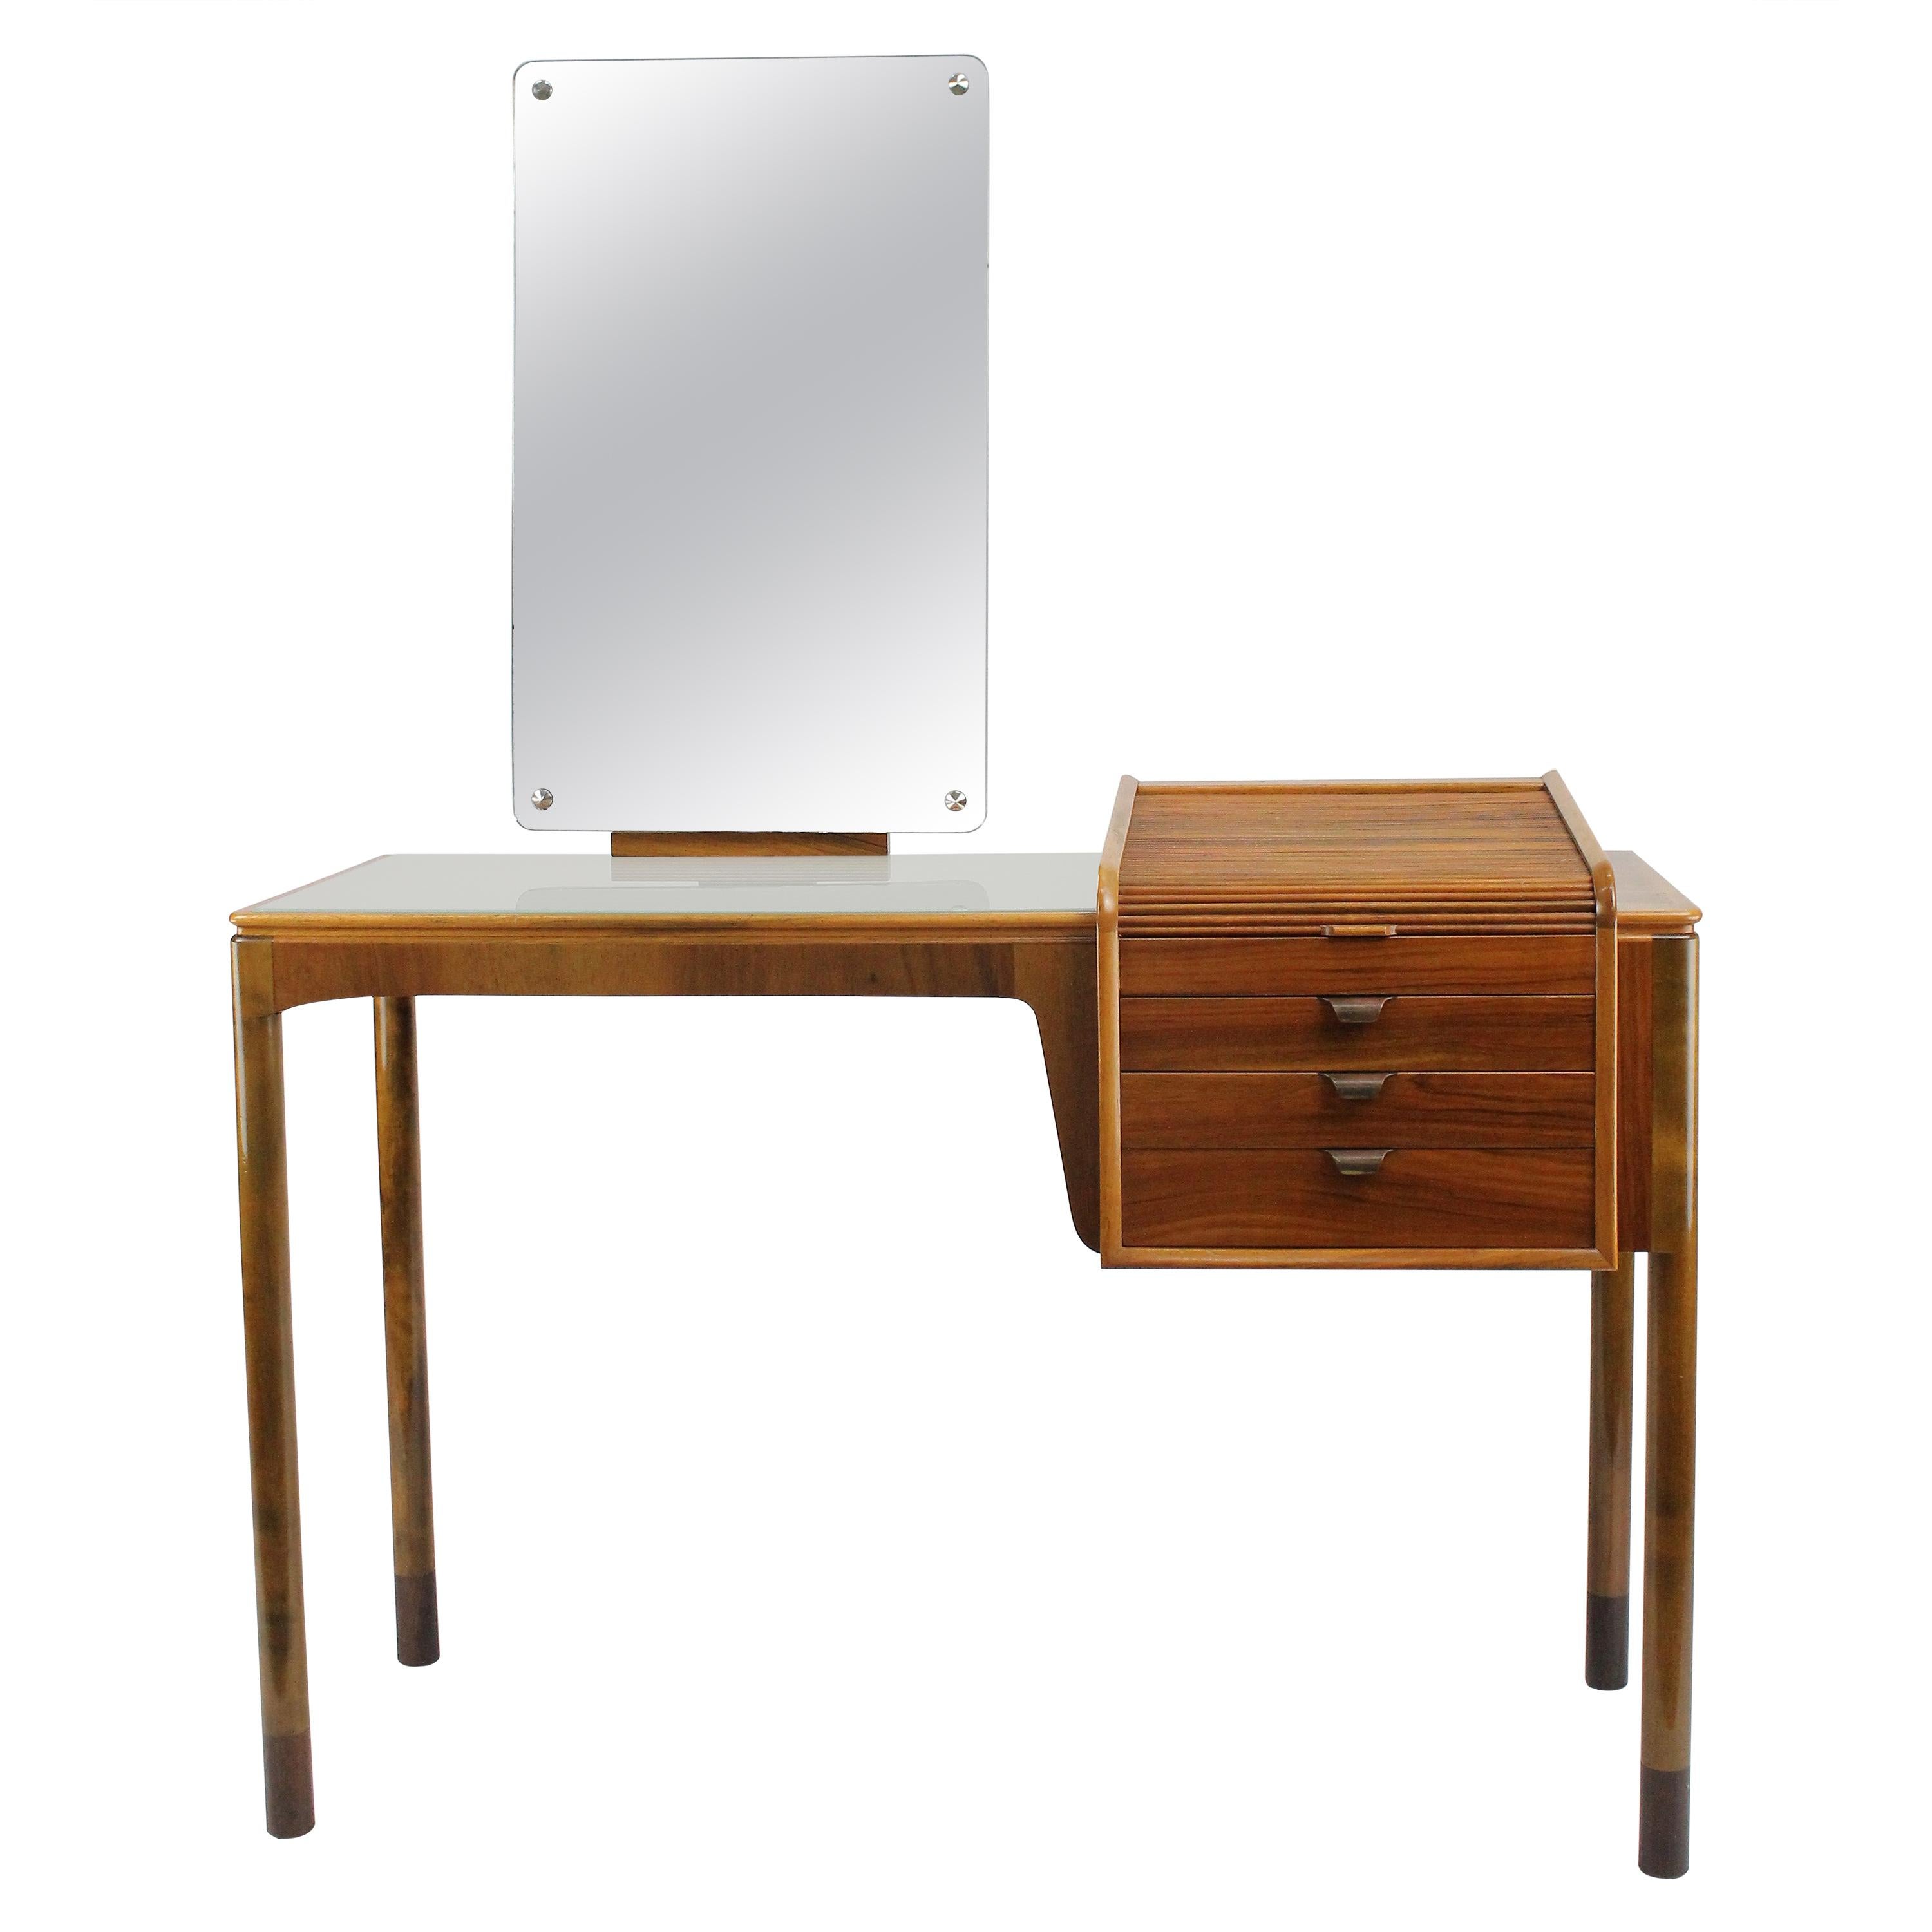 Dressing Table or a Small Writing Desk, Swedish 1940s-1950s by Carl-Axel Acking